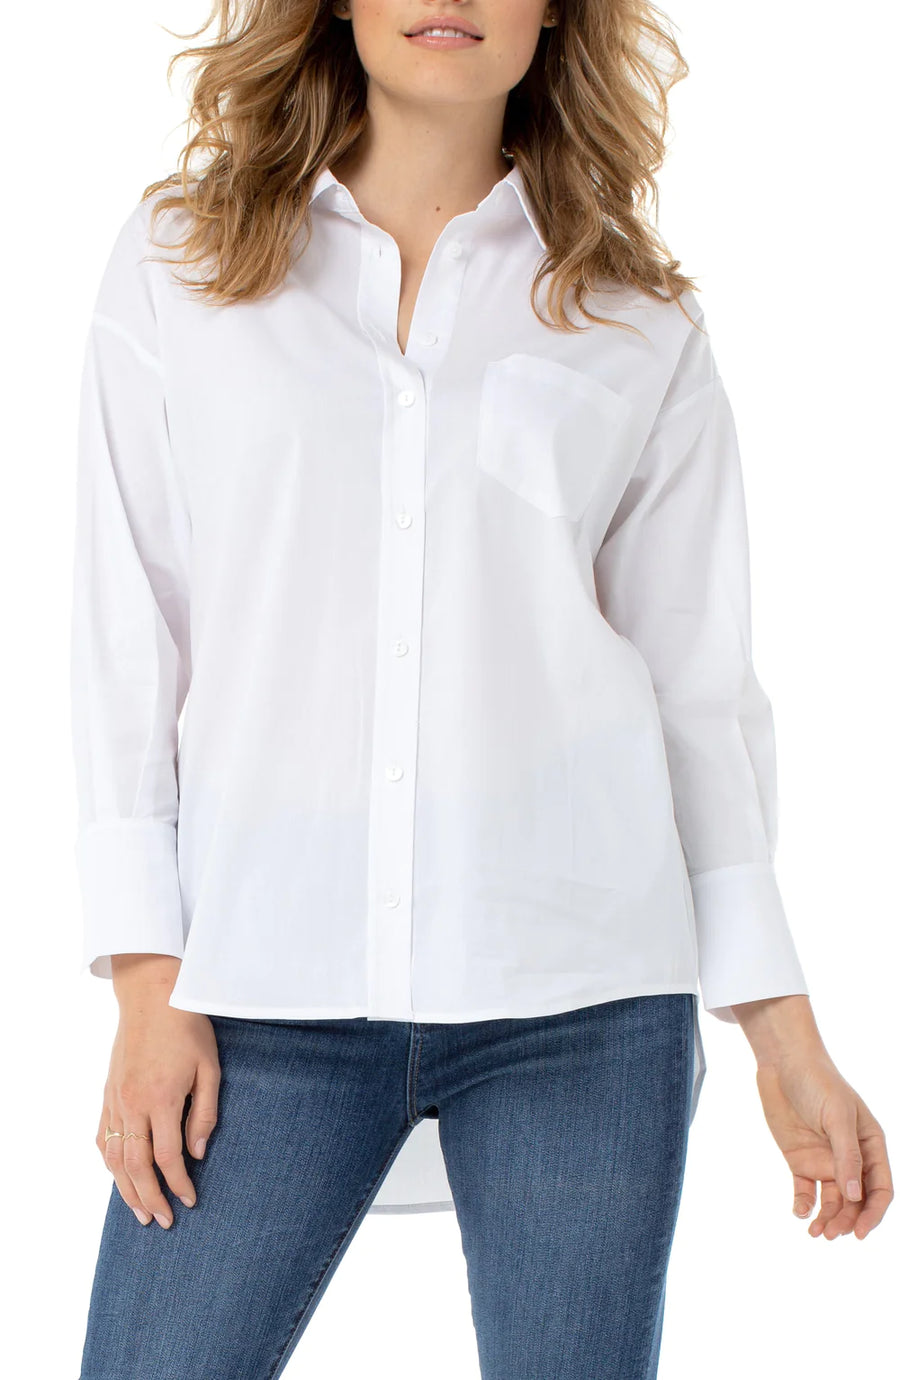 LP8167 The Great White Shirt